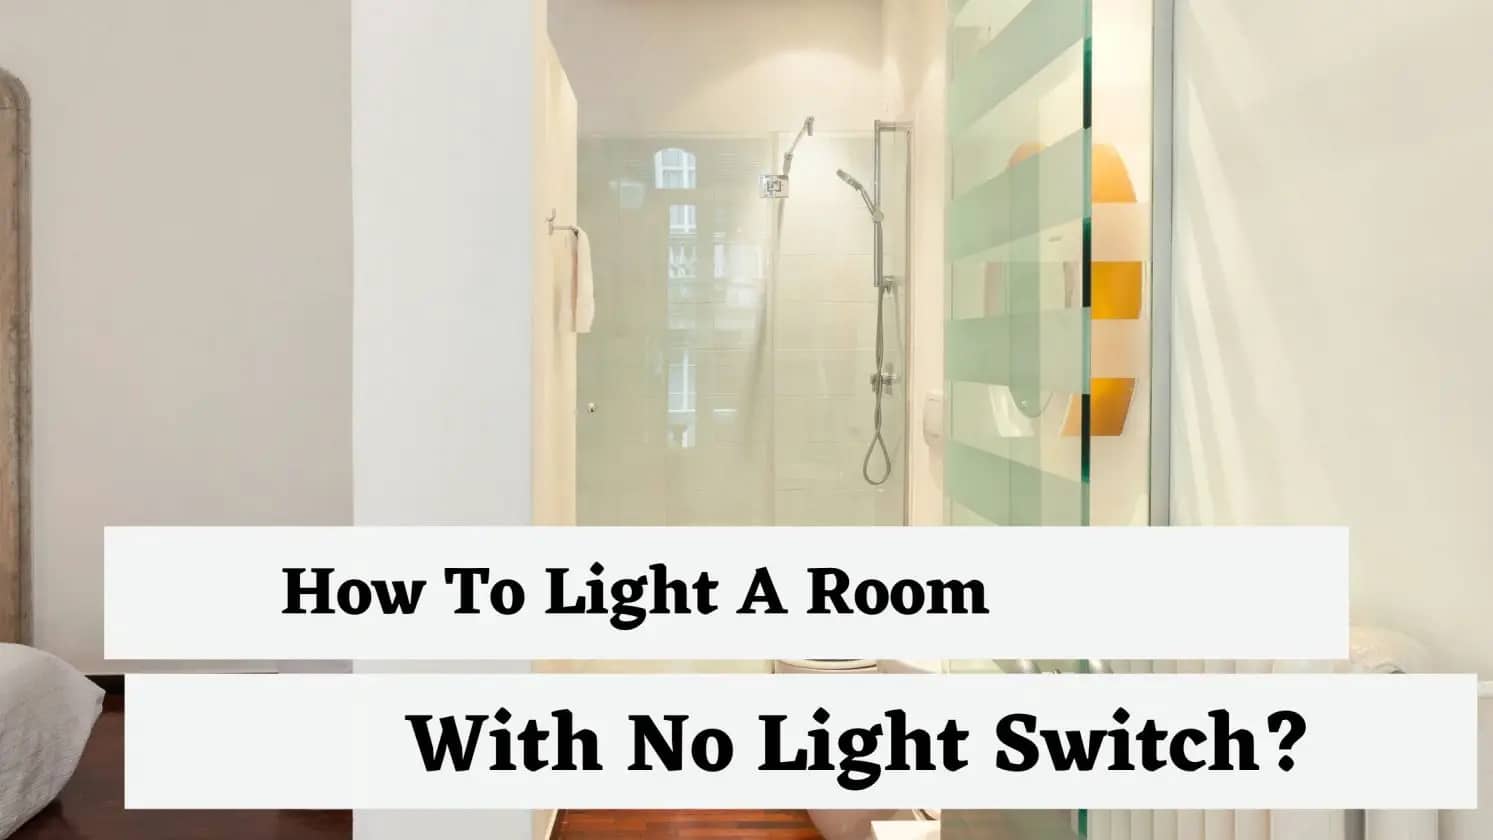 How To Light A Room With No Light Switch?